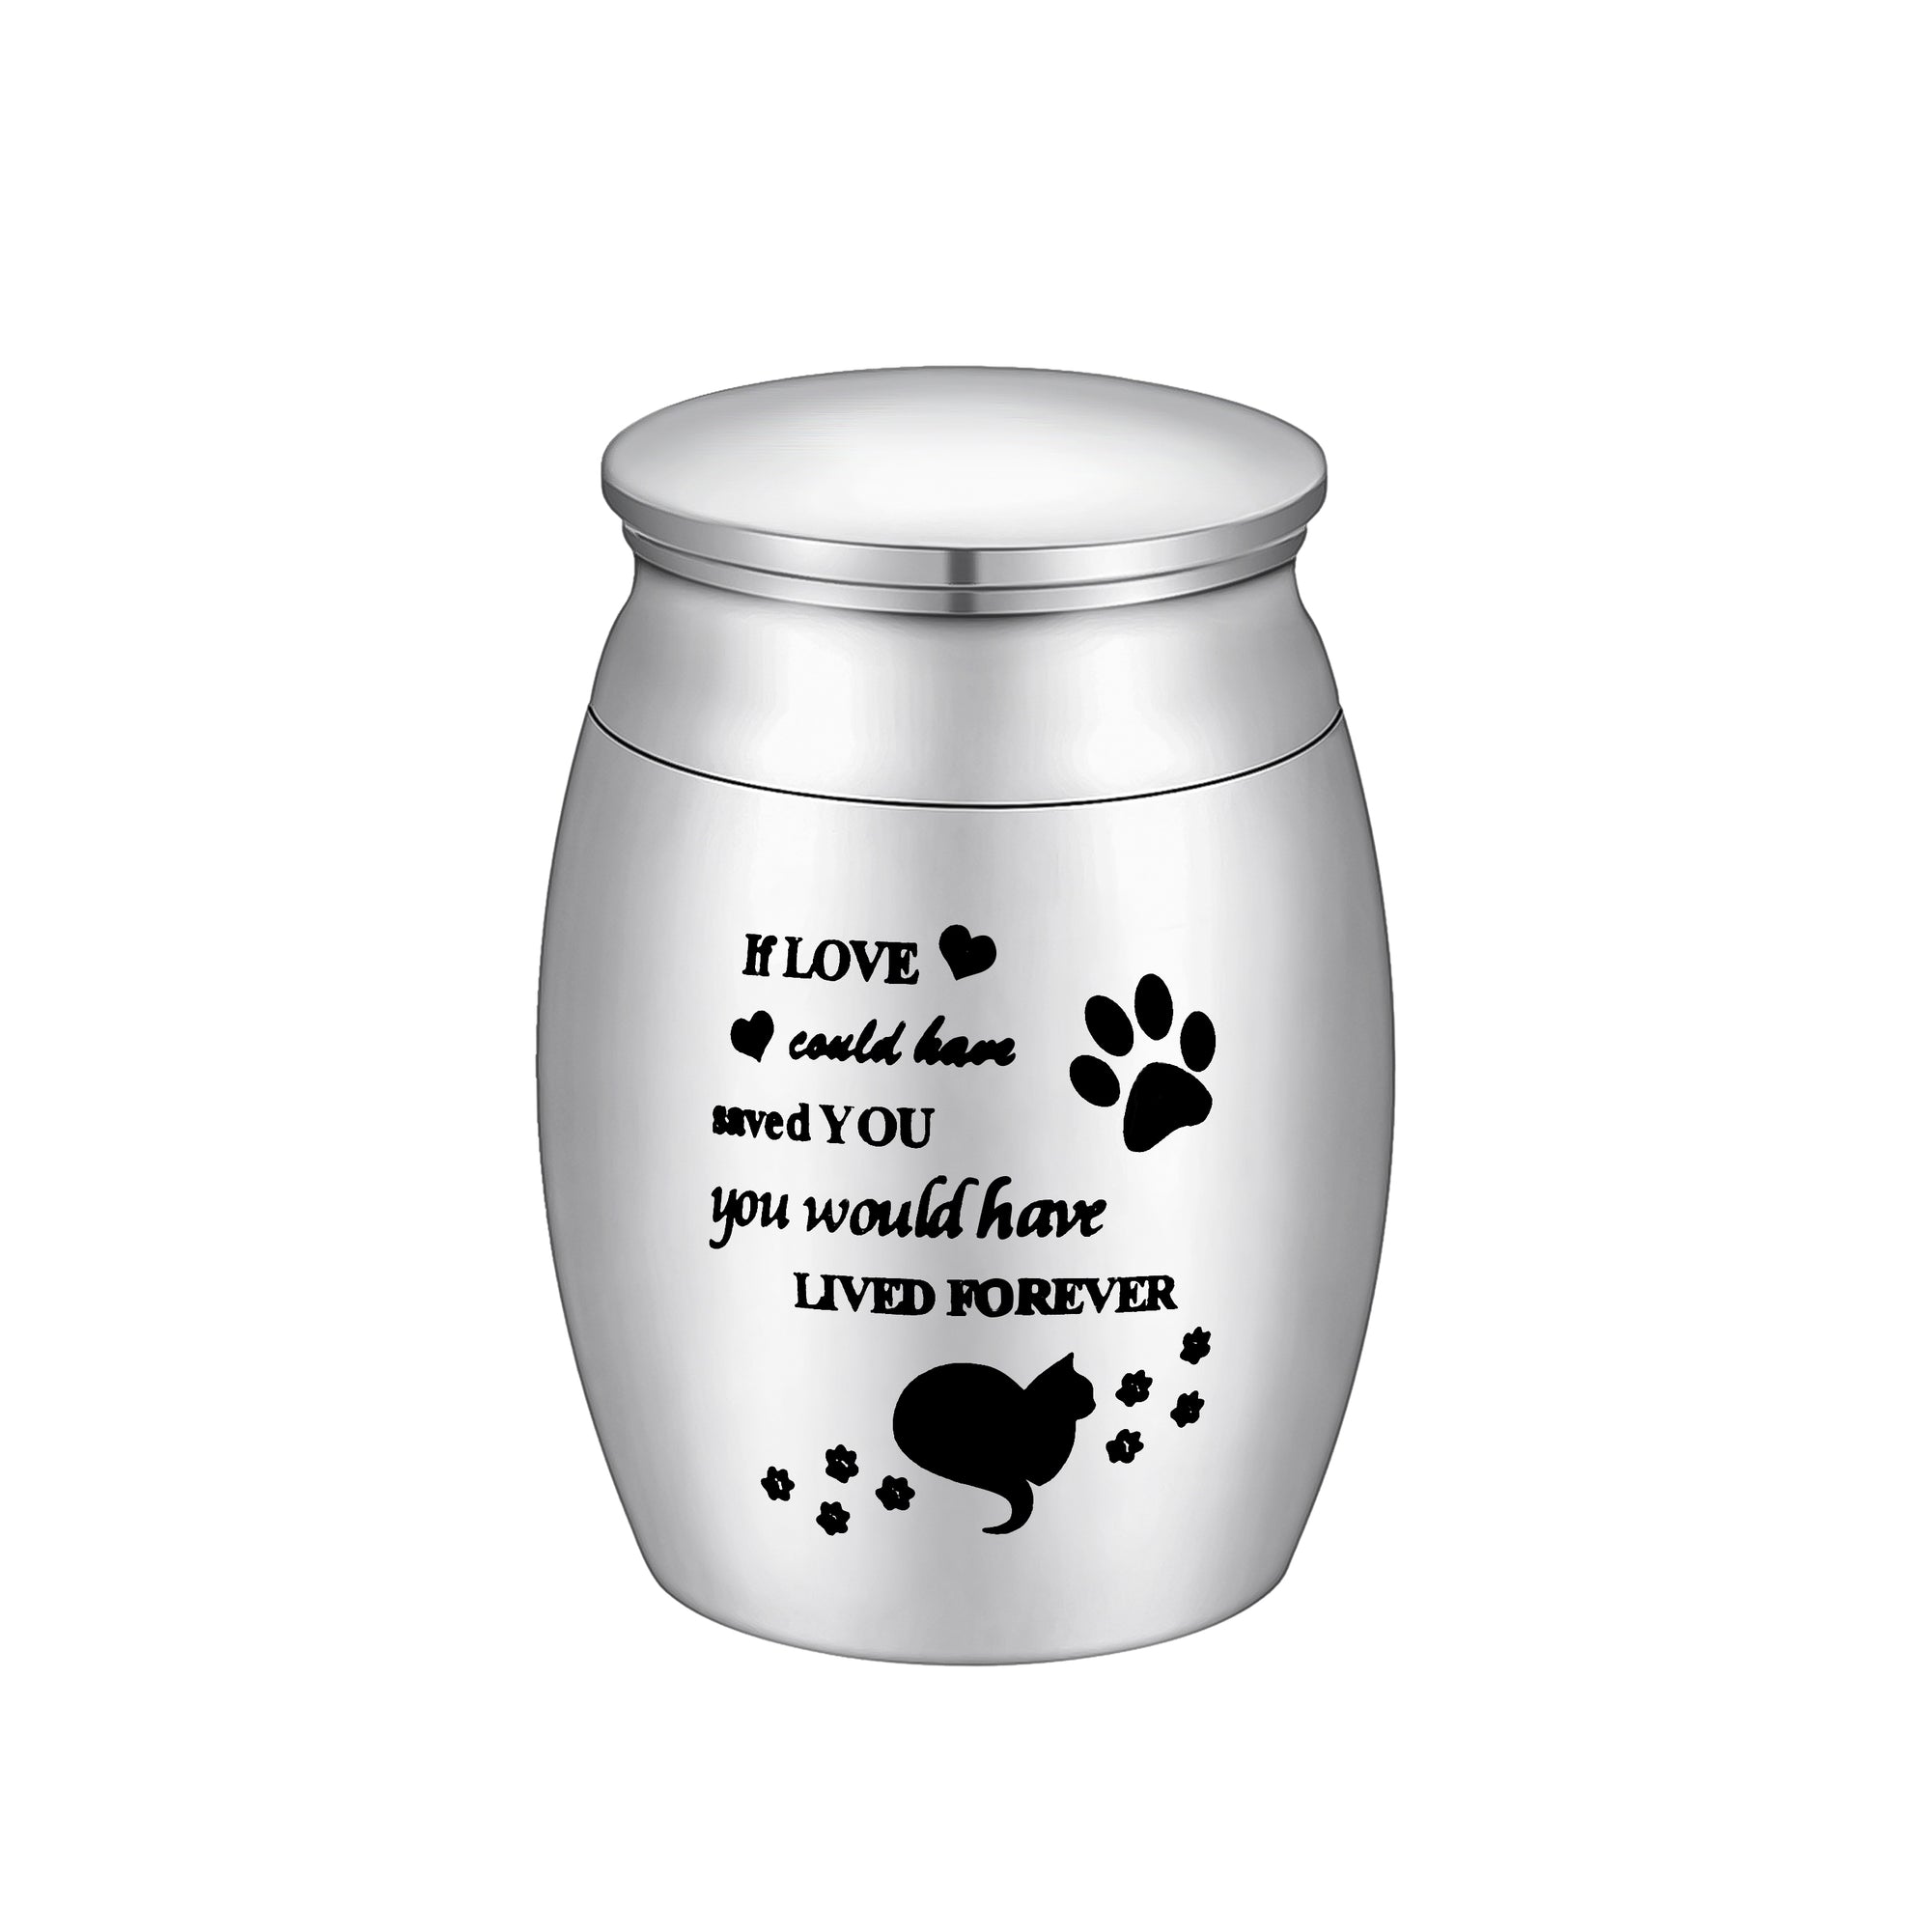 Mini Cremation Urns with Paws and Cat